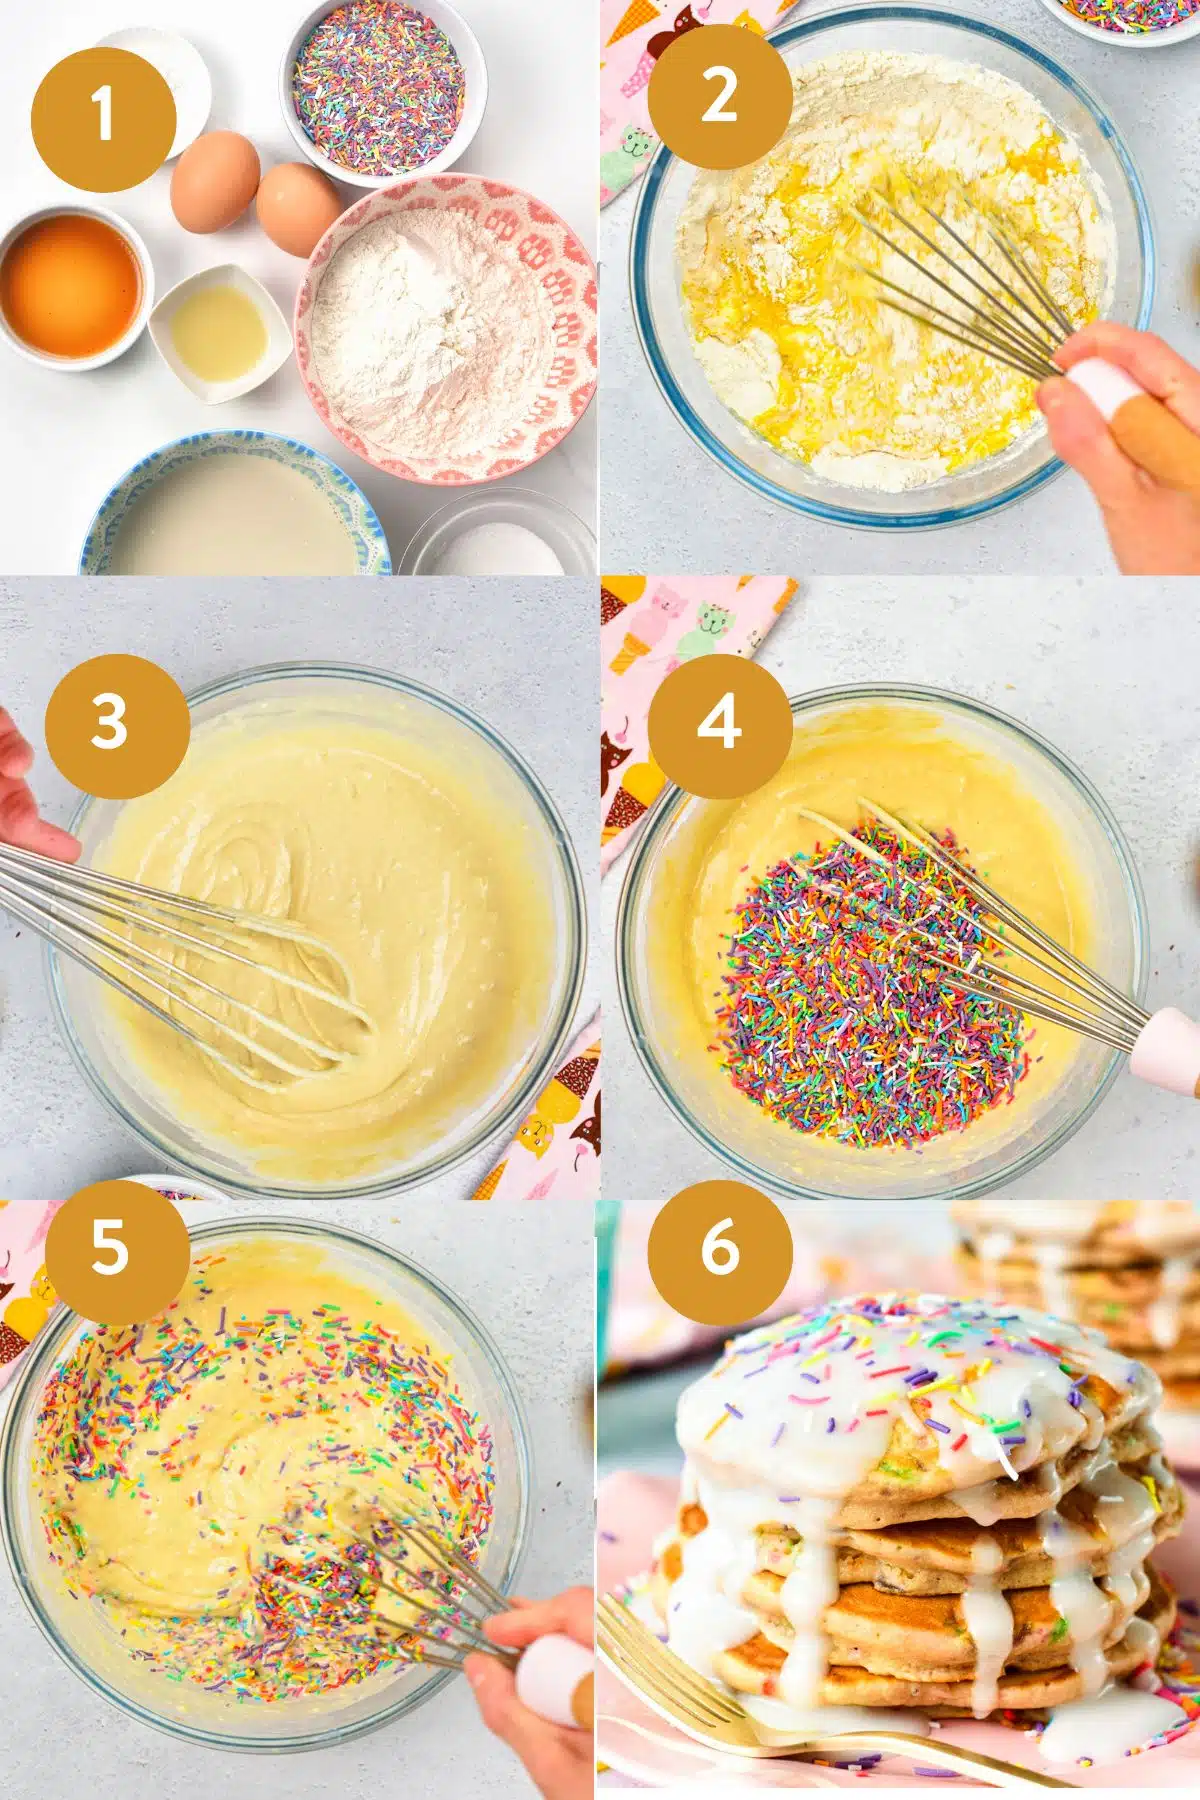  These funfetti pancakes are easy, fluffy pancakes filled with funfetti colors and perfect for birthday breakfast . Plus, they are easy to make in less than 20 minutes for a quick party breakfast. These funfetti pancakes are easy, fluffy pancakes filled with funfetti colors and perfect for birthday breakfast . Plus, they are easy to make in less than 20 minutes for a quick party breakfast.